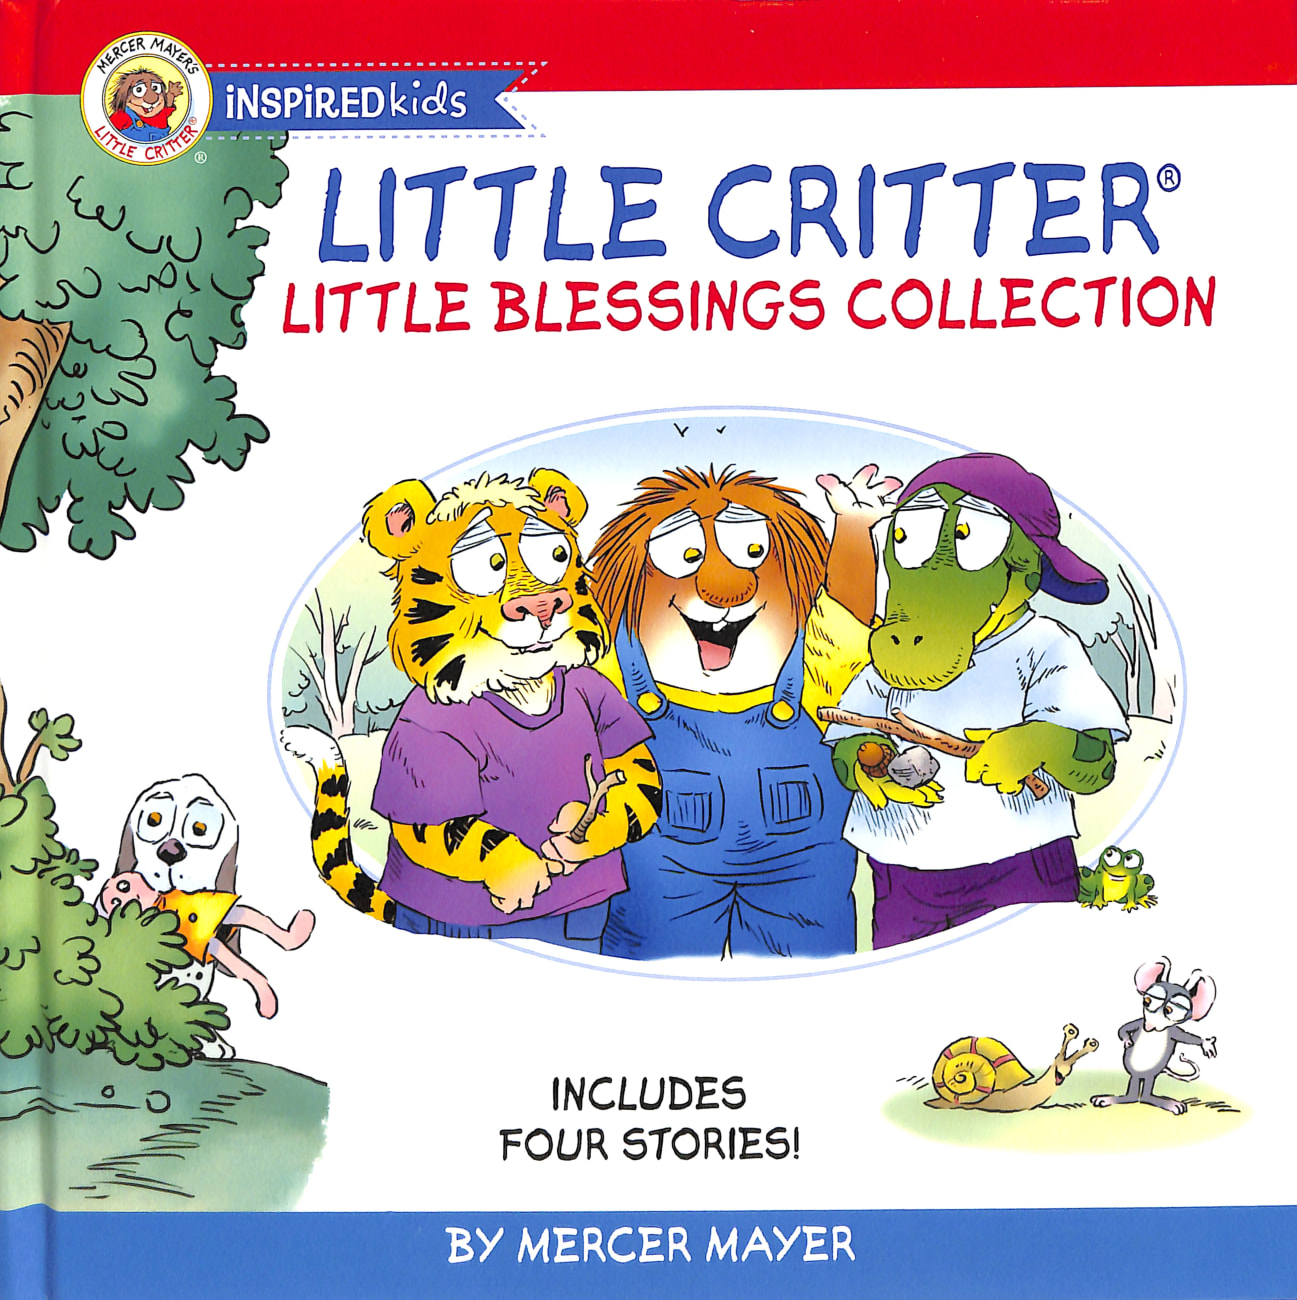 Little Blessings Collection - Includes Four Stories! (Little Critter Series) Hardback